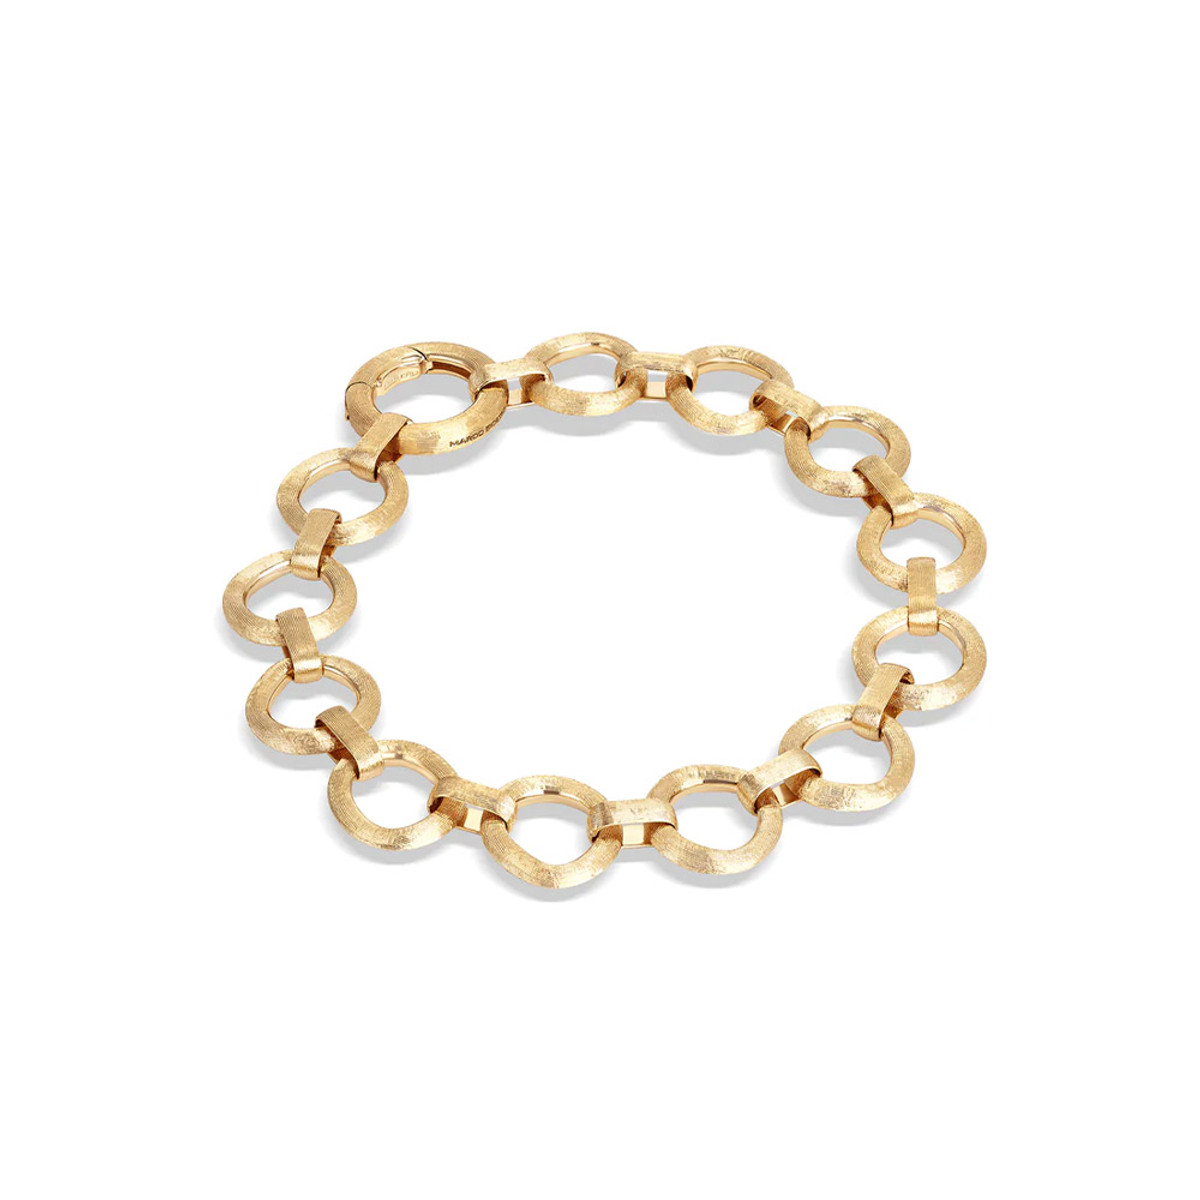 Marco Bicego Jaipur Collection 18K Yellow Gold Flat Link Bracelet-47073 Product Image